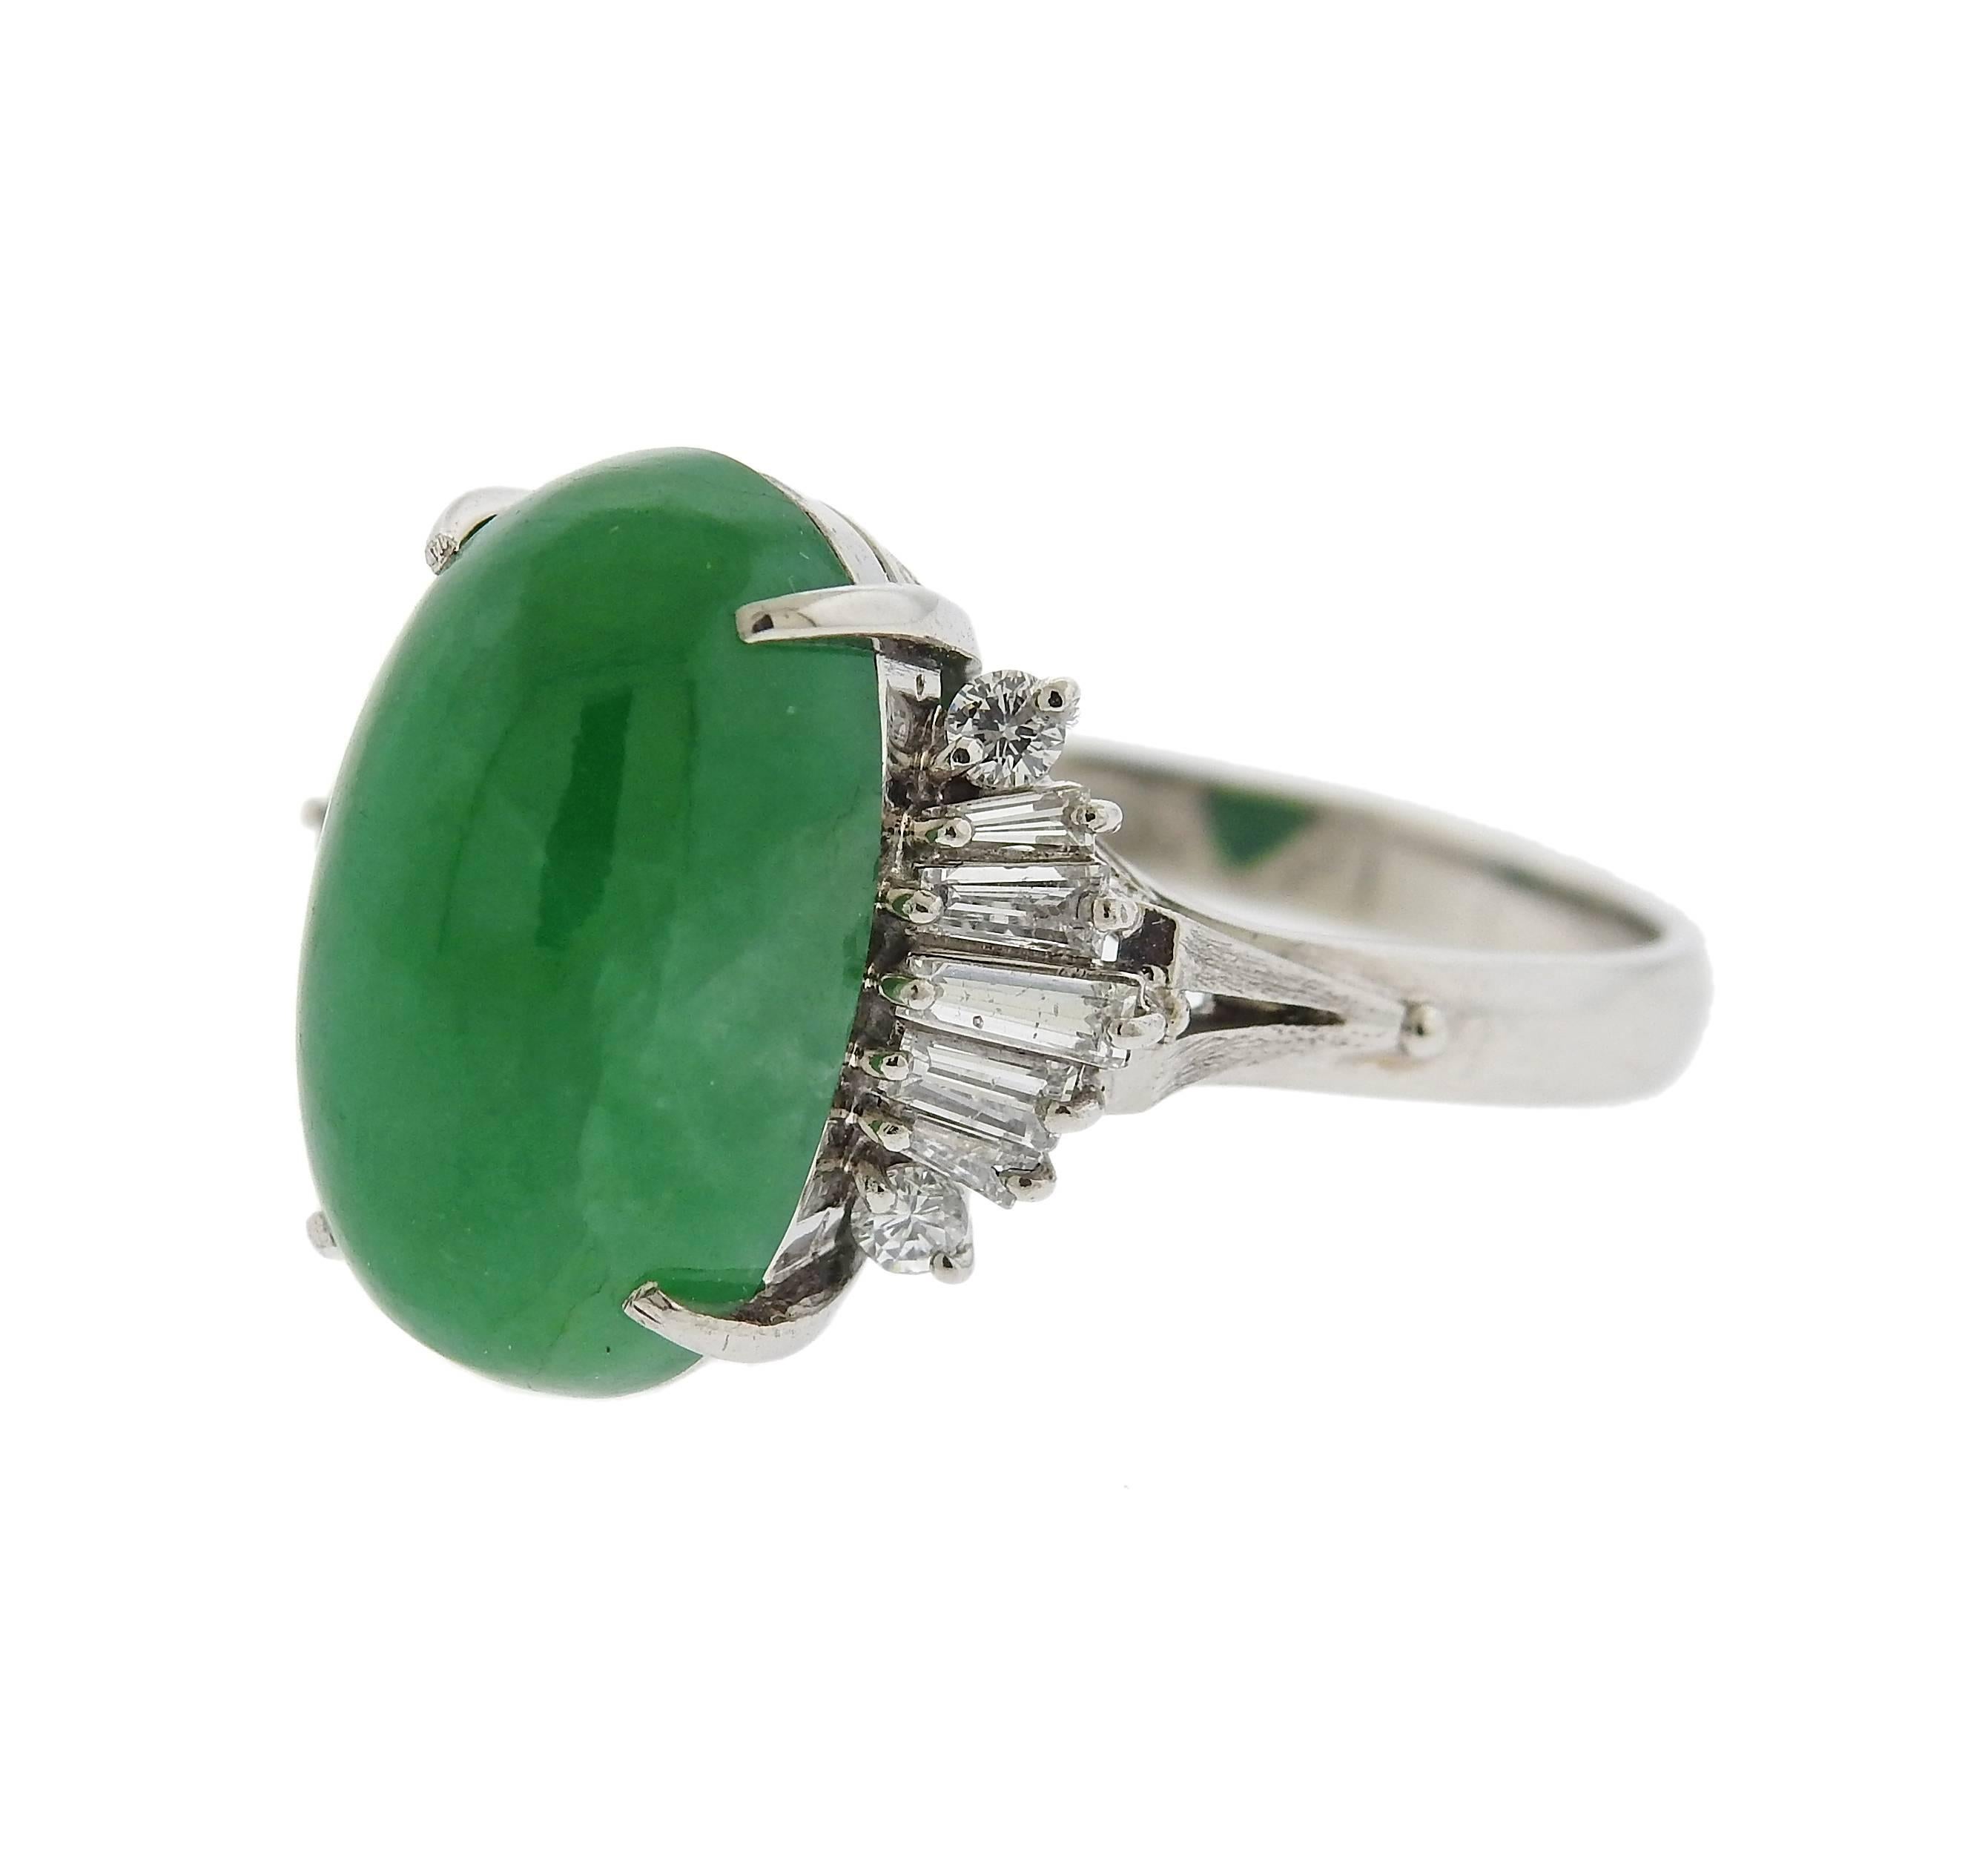 Platinum ring, set with oval jade cabochon, weighing 10.87ct, surrounded with 0.61ctw in diamonds. Ring size 8 3/4, ring top measures 17mm x 18mm. Marked: 10.87, Pt850, D0.61.  Weight of the piece - 9.2 grams.